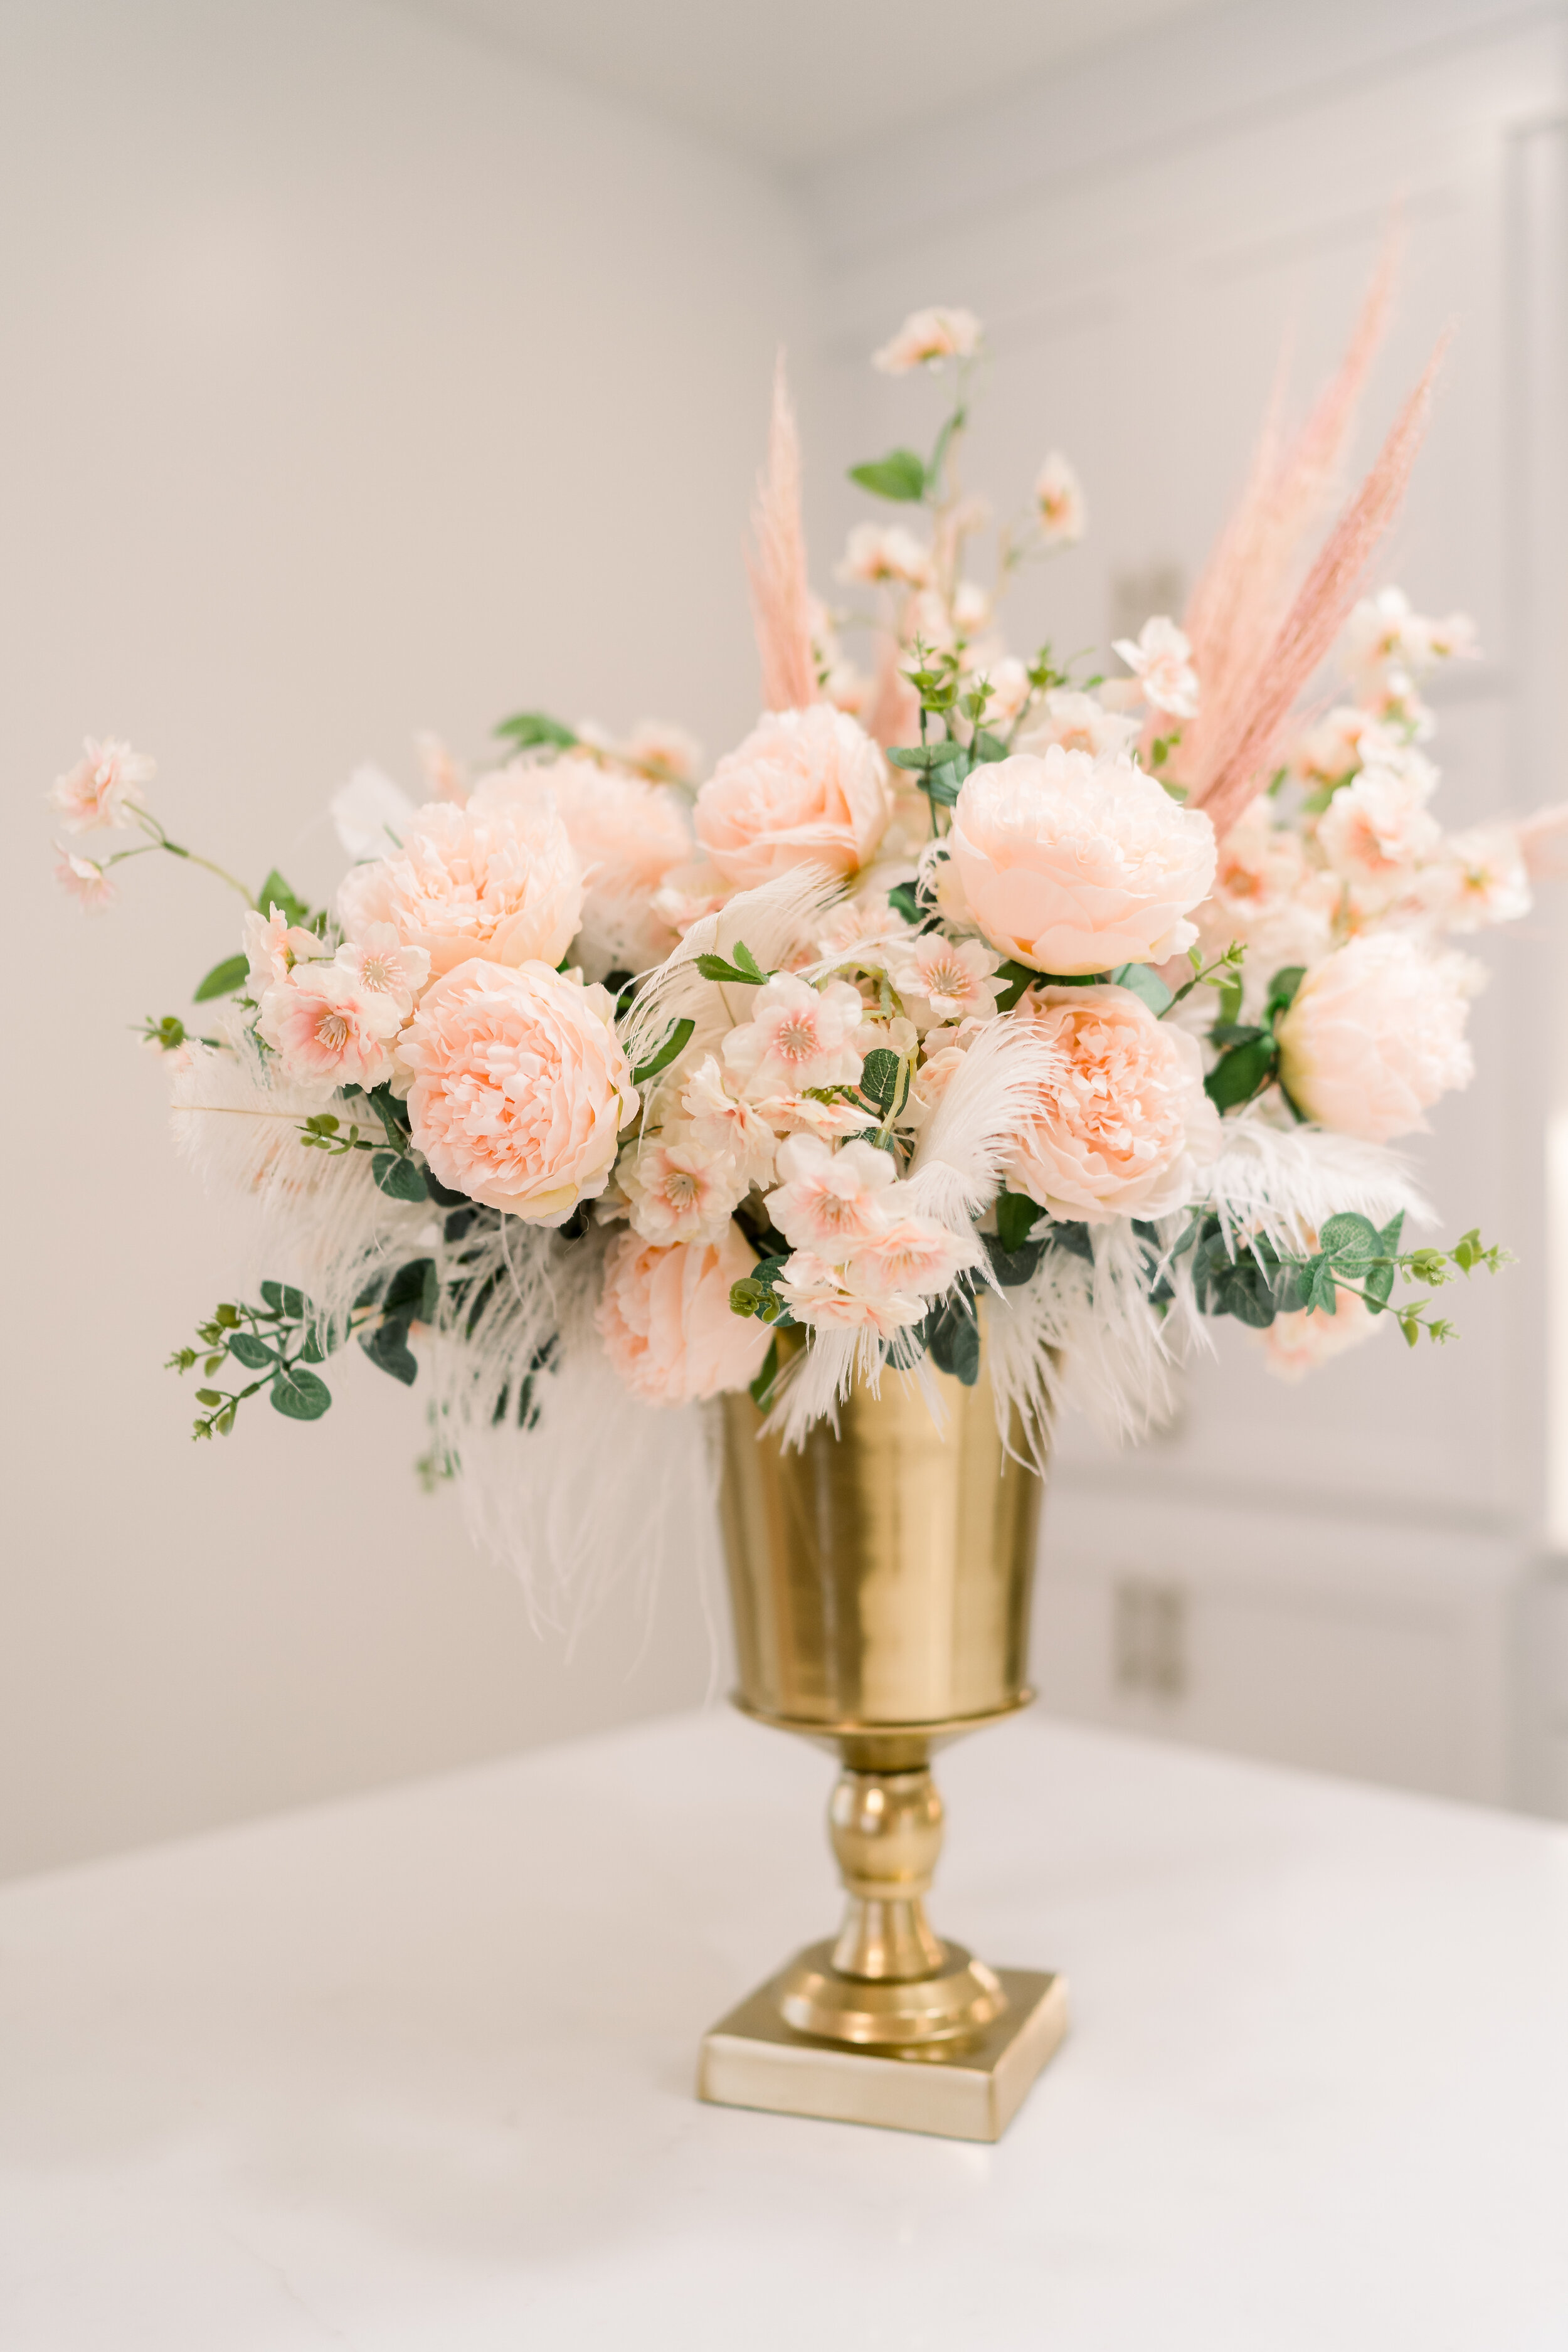 Celebration house boasts all things pink, frilly, and extra. These arrangements are no exception, filled with ostrich feathers and faux flowers like peonies, garden roses, ranunculus, cherry blossom and eucalyptus. Designed by florist Rosemary & Fin…